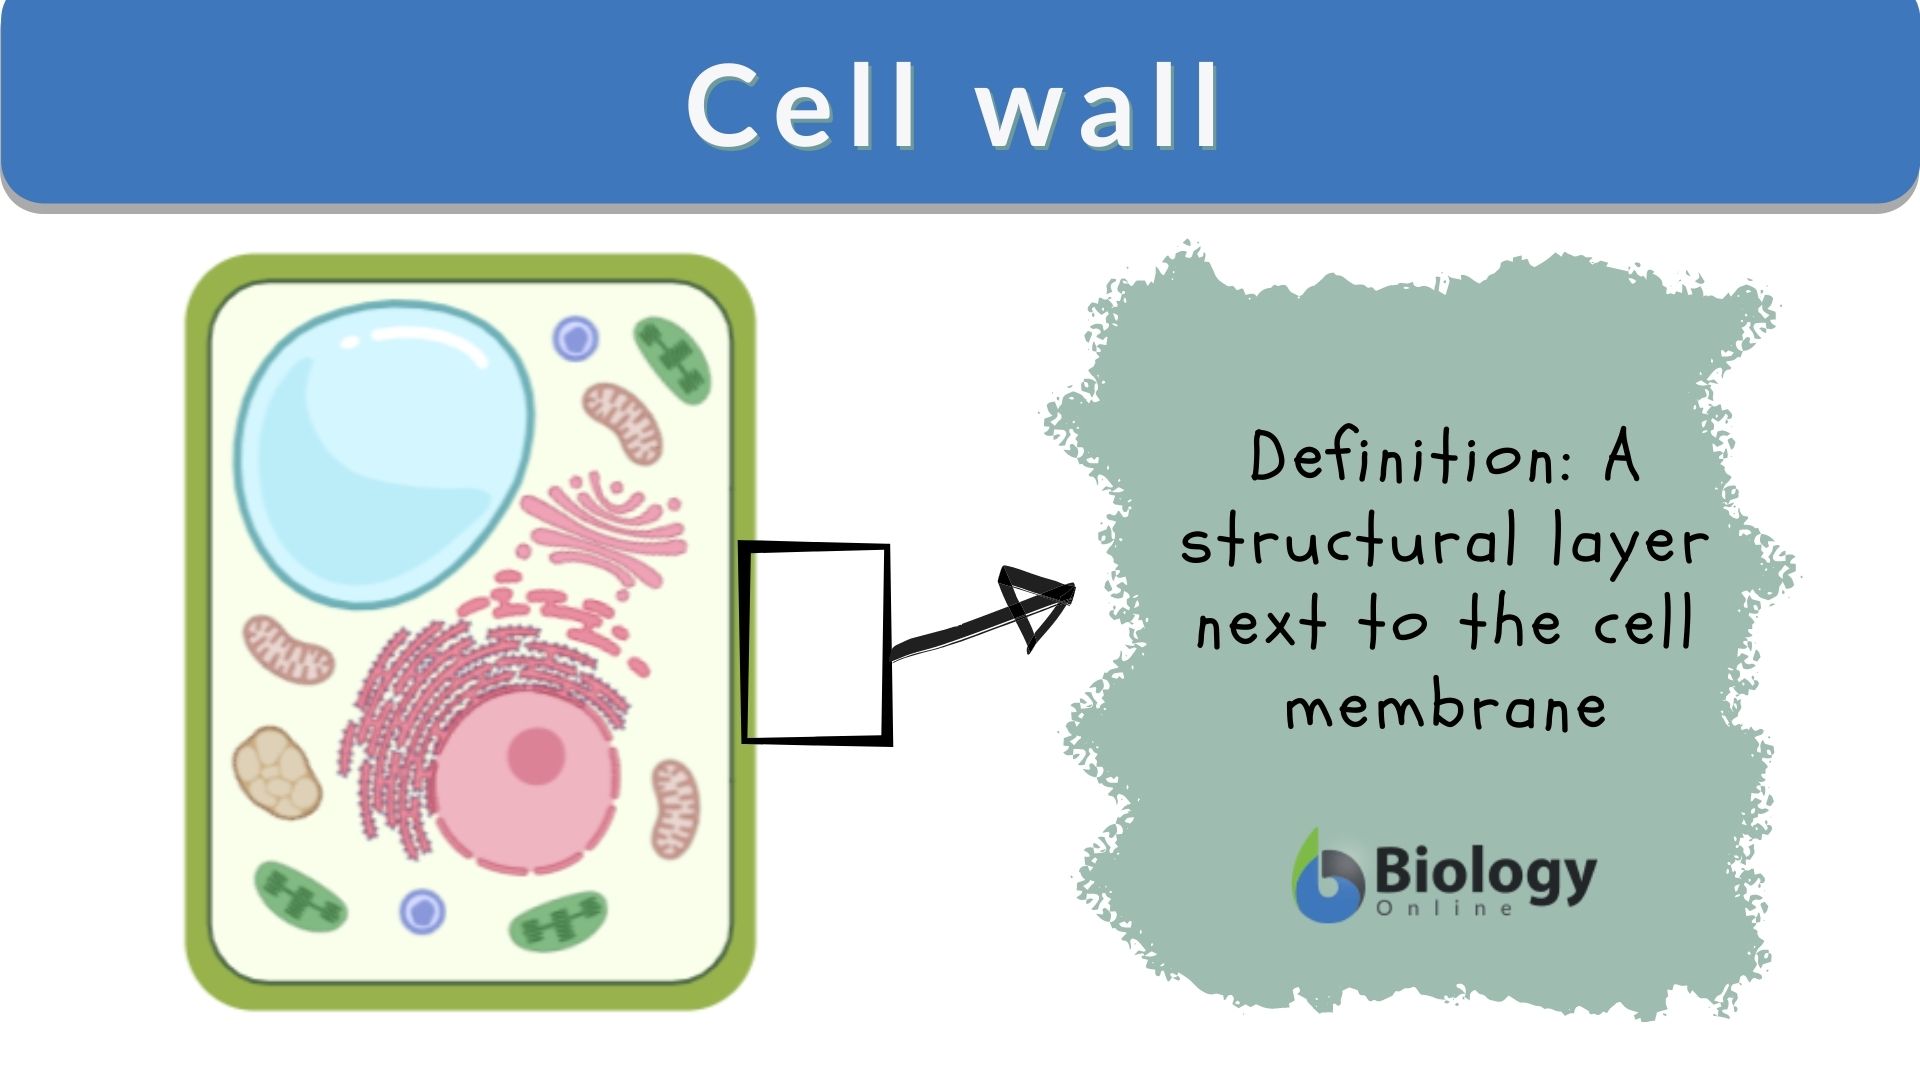 cell membrane in a plant cell